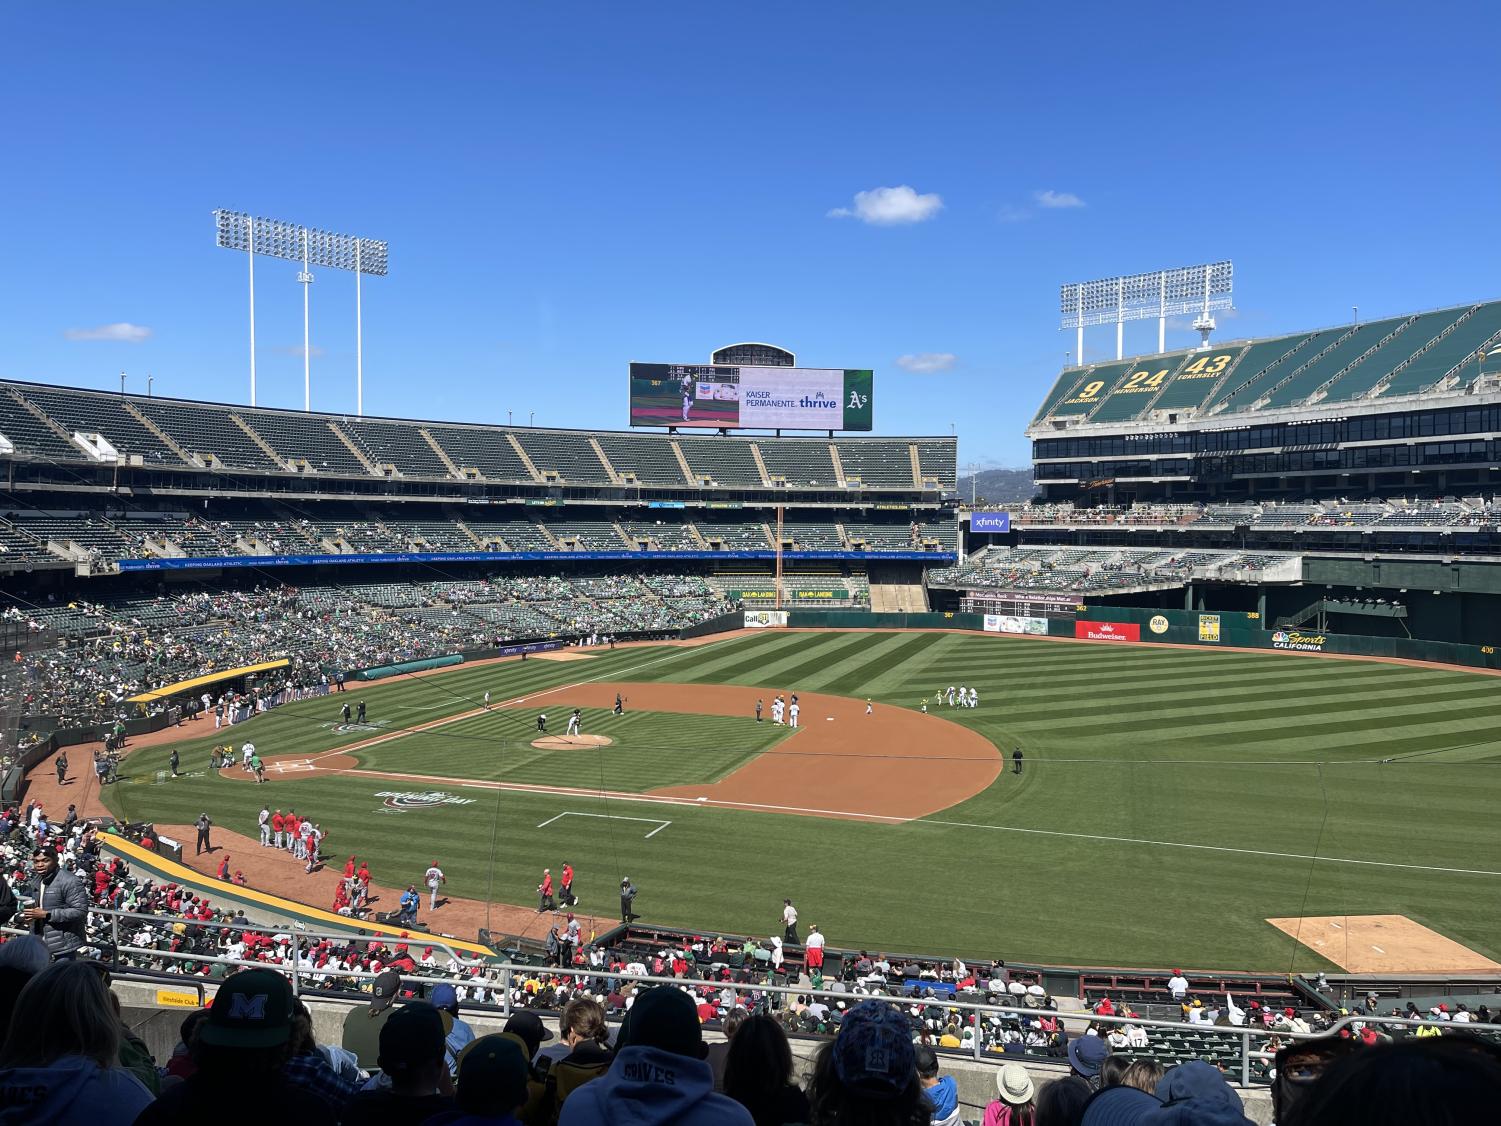 Athletics' dismal attendance shows fans were listening to Oakland, MLB